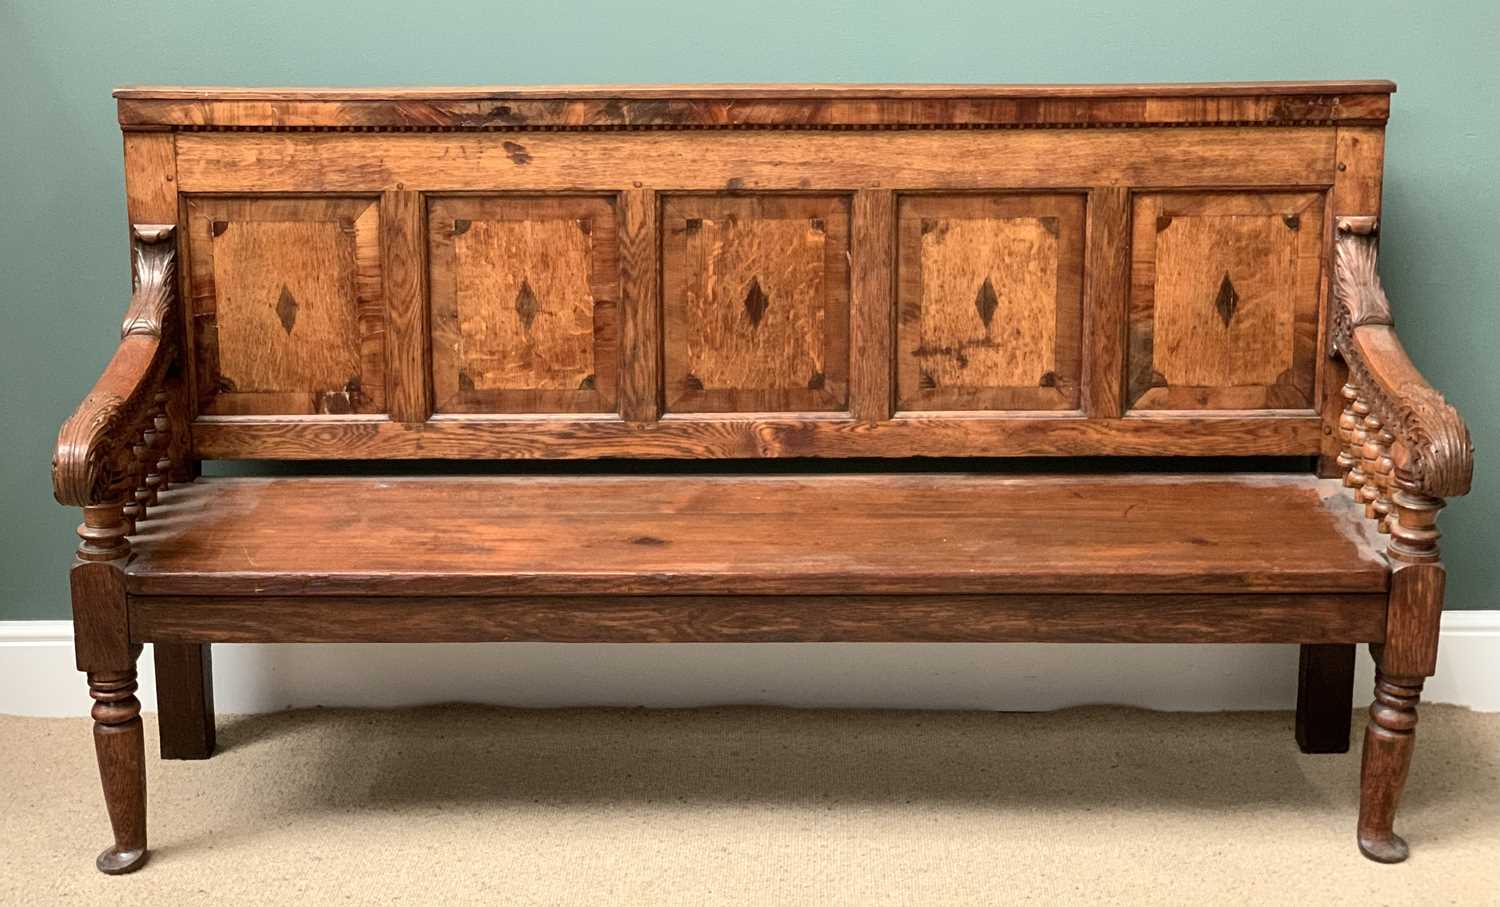 19th CENTURY OAK BENCH with a five fielded panel back, carved arms with bobbin supports, on turned